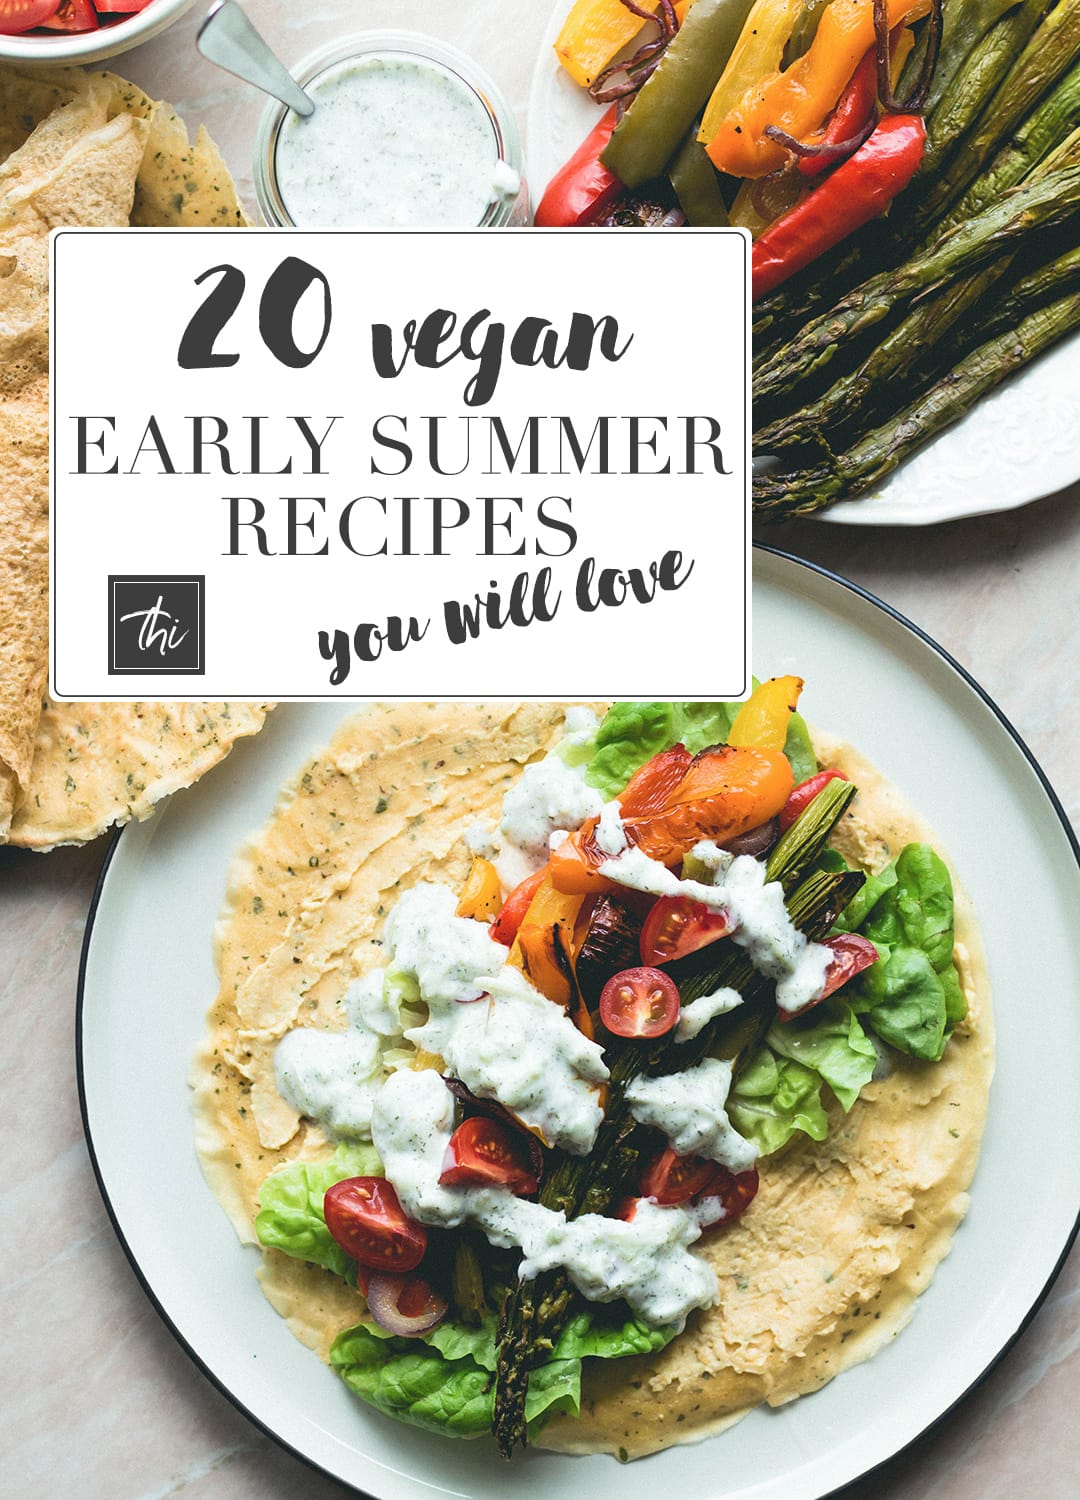 20 Vegan Early Summer Recipes You Will Love - early summer is the perfect time for delicious recipes with asparagus, strawberries, rhubarb, cherries, sour cherries, radishes, peas, and more! | thehealthfulideas.com